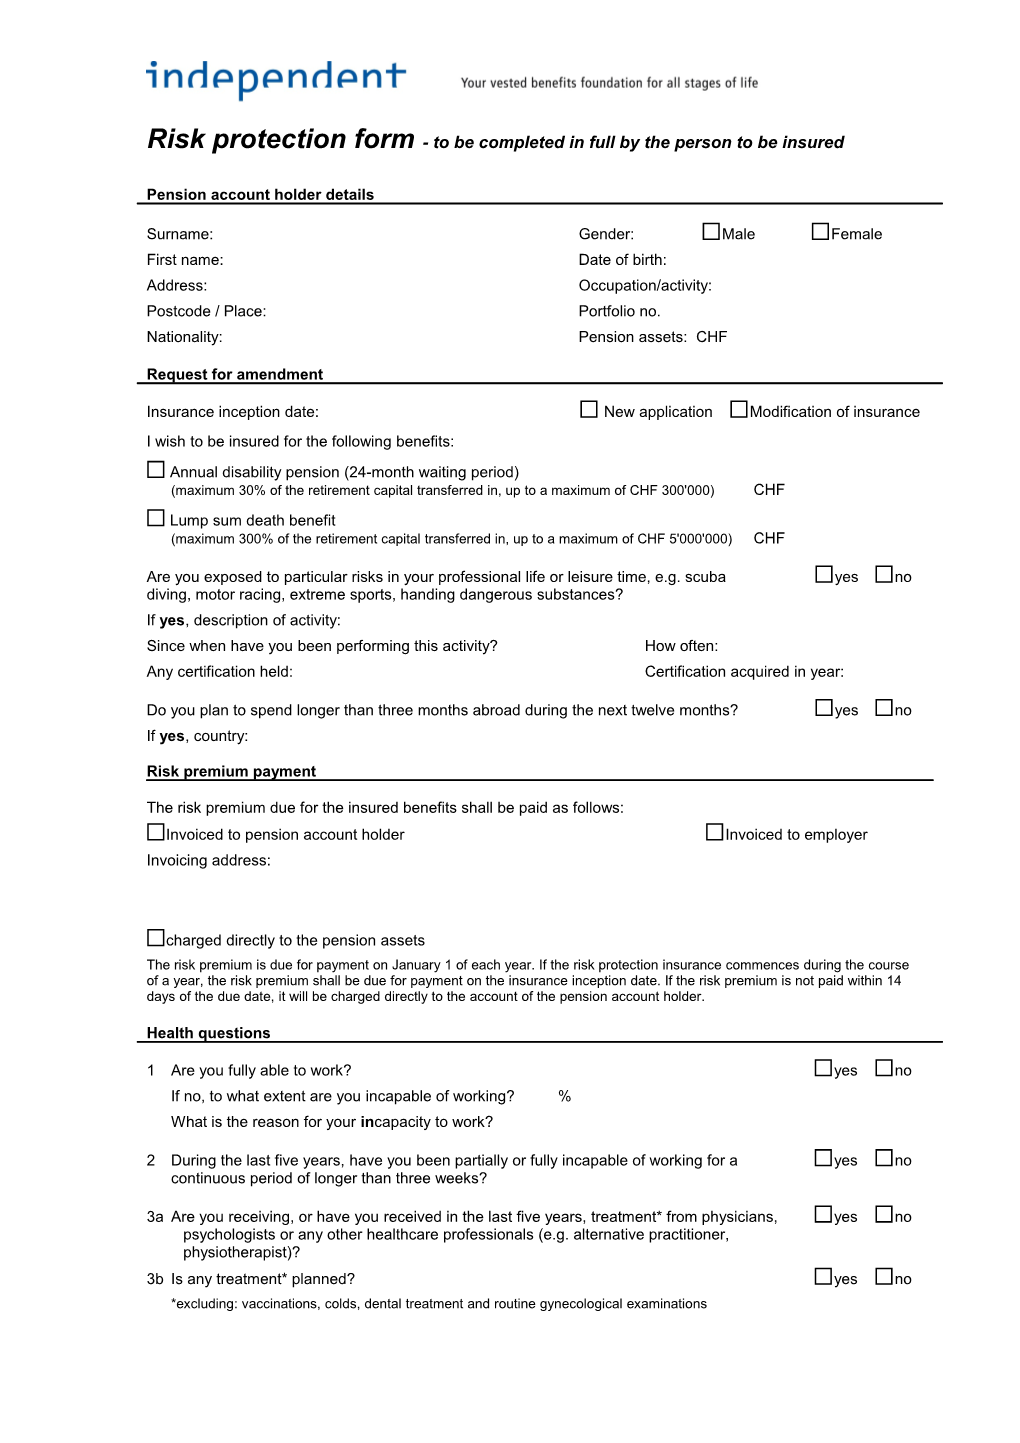 Risk Protection Form - to Be Completed in Full by the Person to Be Insured